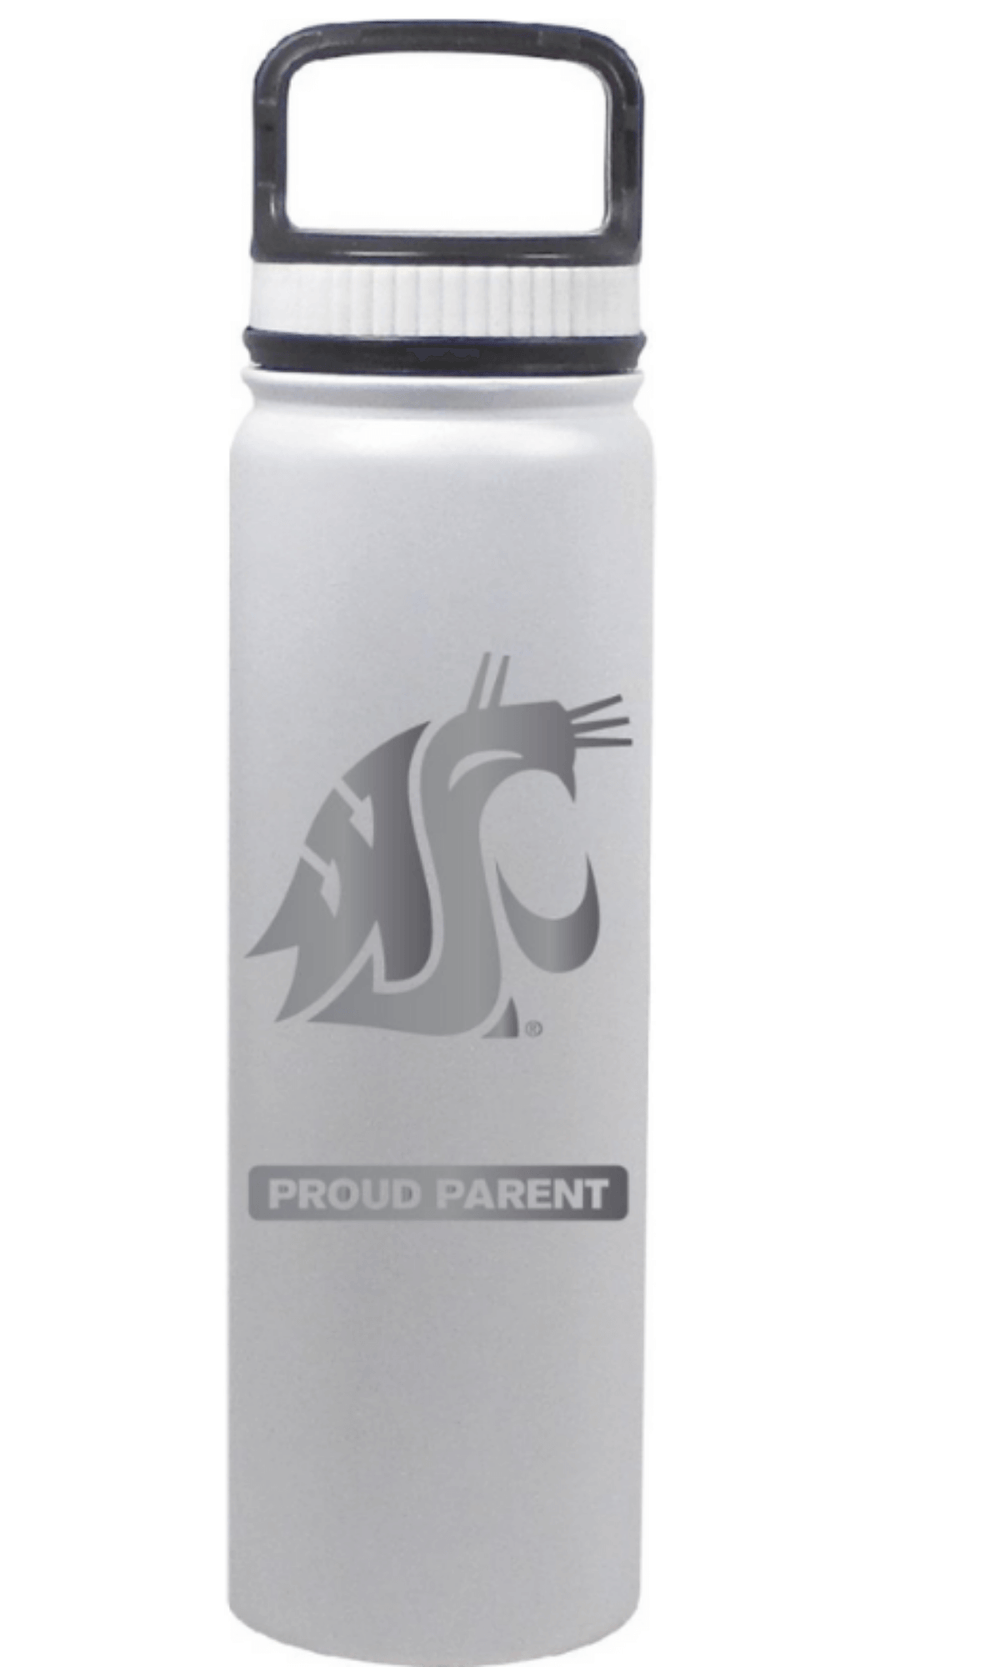 WSU 24 oz Matte White Stainless Steel Water Bottle - Proud Parent - ONLINE ONLY!